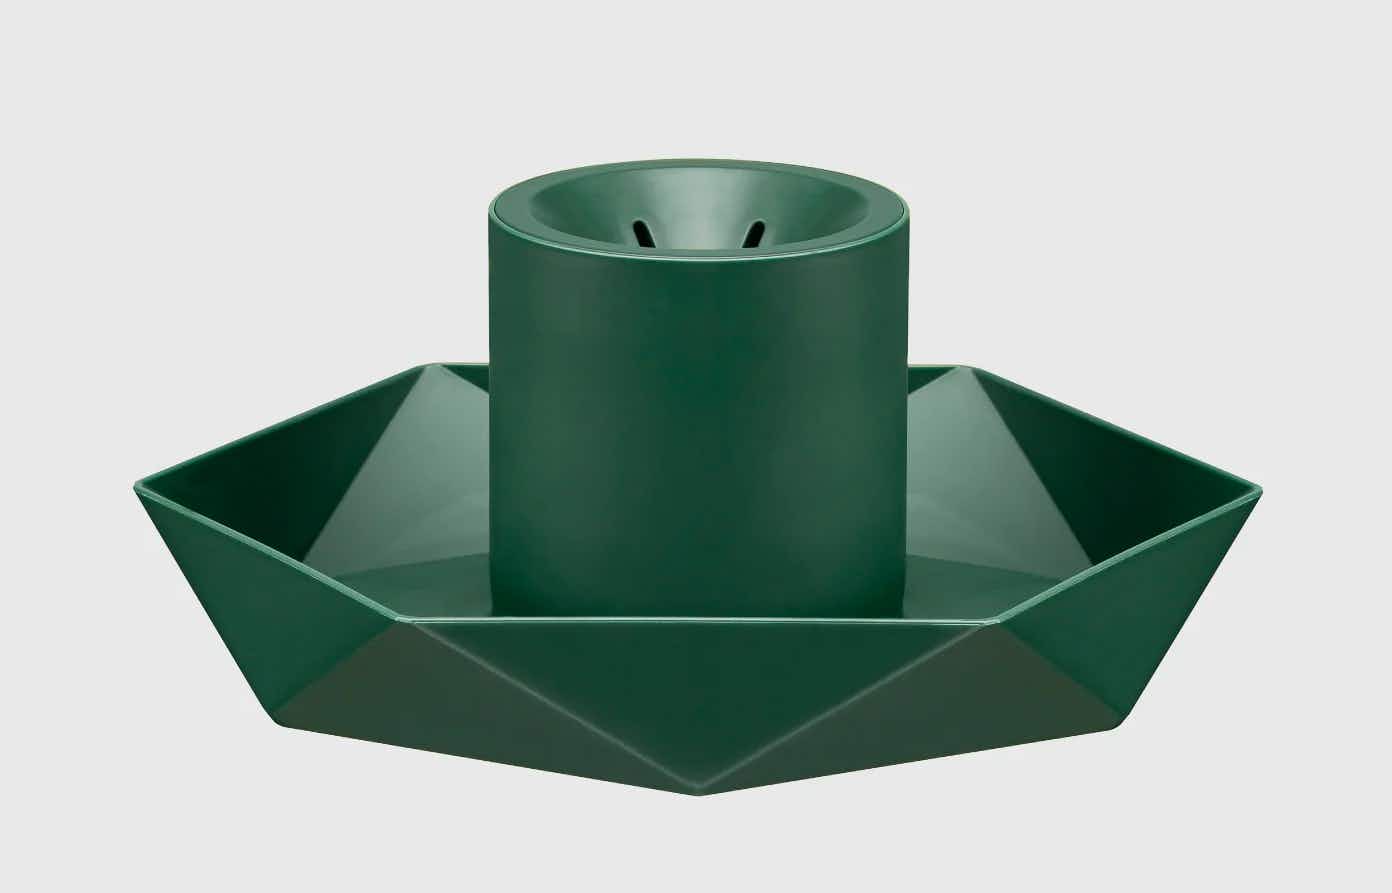 A Green diamond ArtificialChristmas tree stand on a grey background.